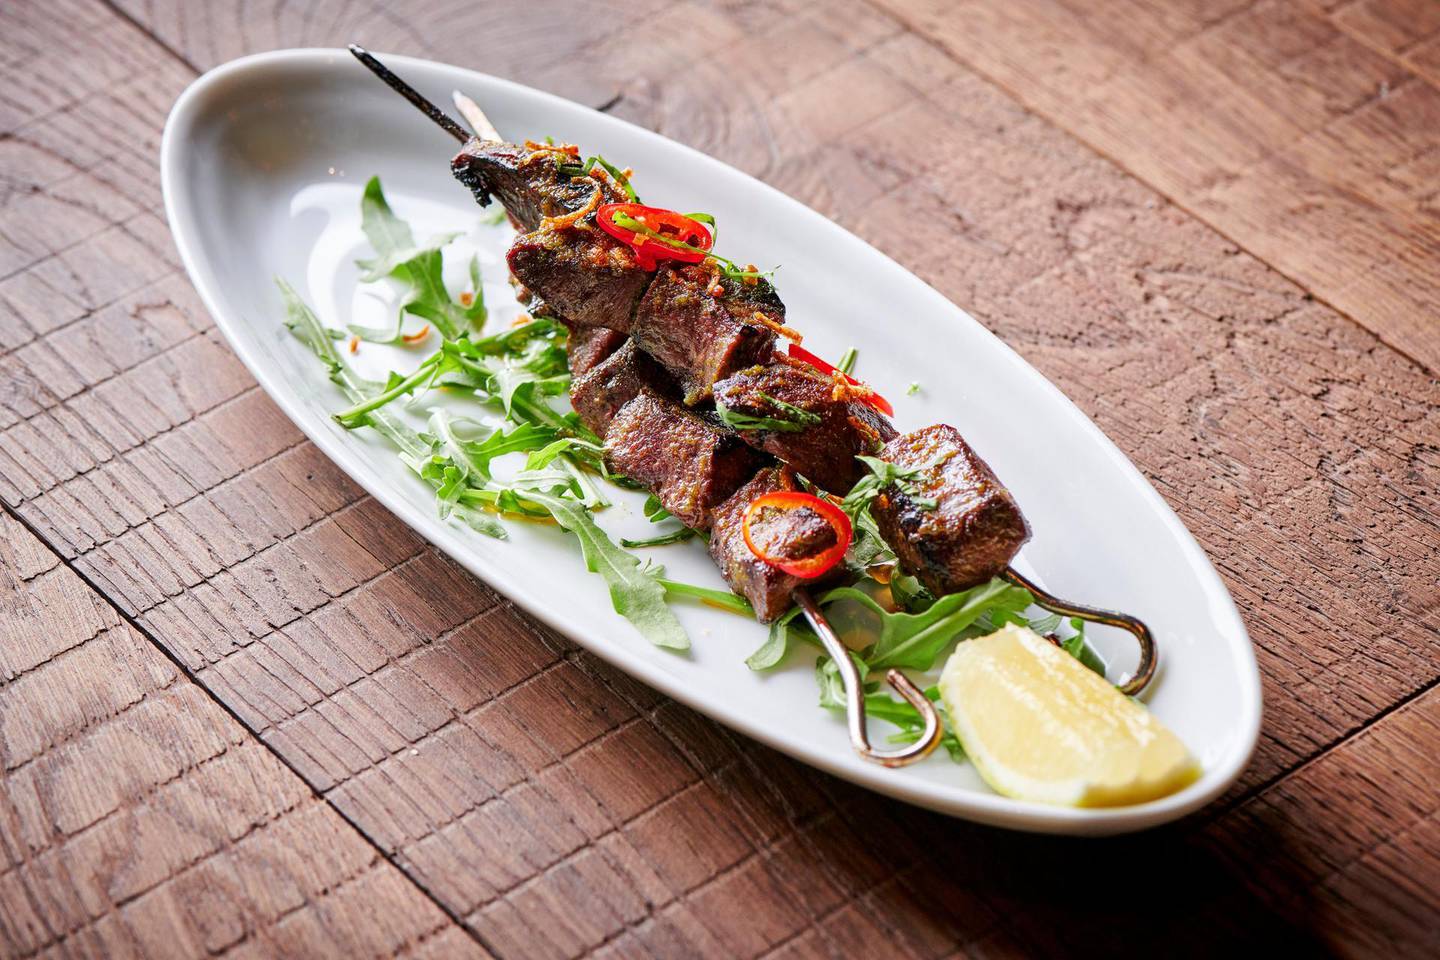 Marinated grilled beef heart skewers served at Carna by Dario Cecchini.